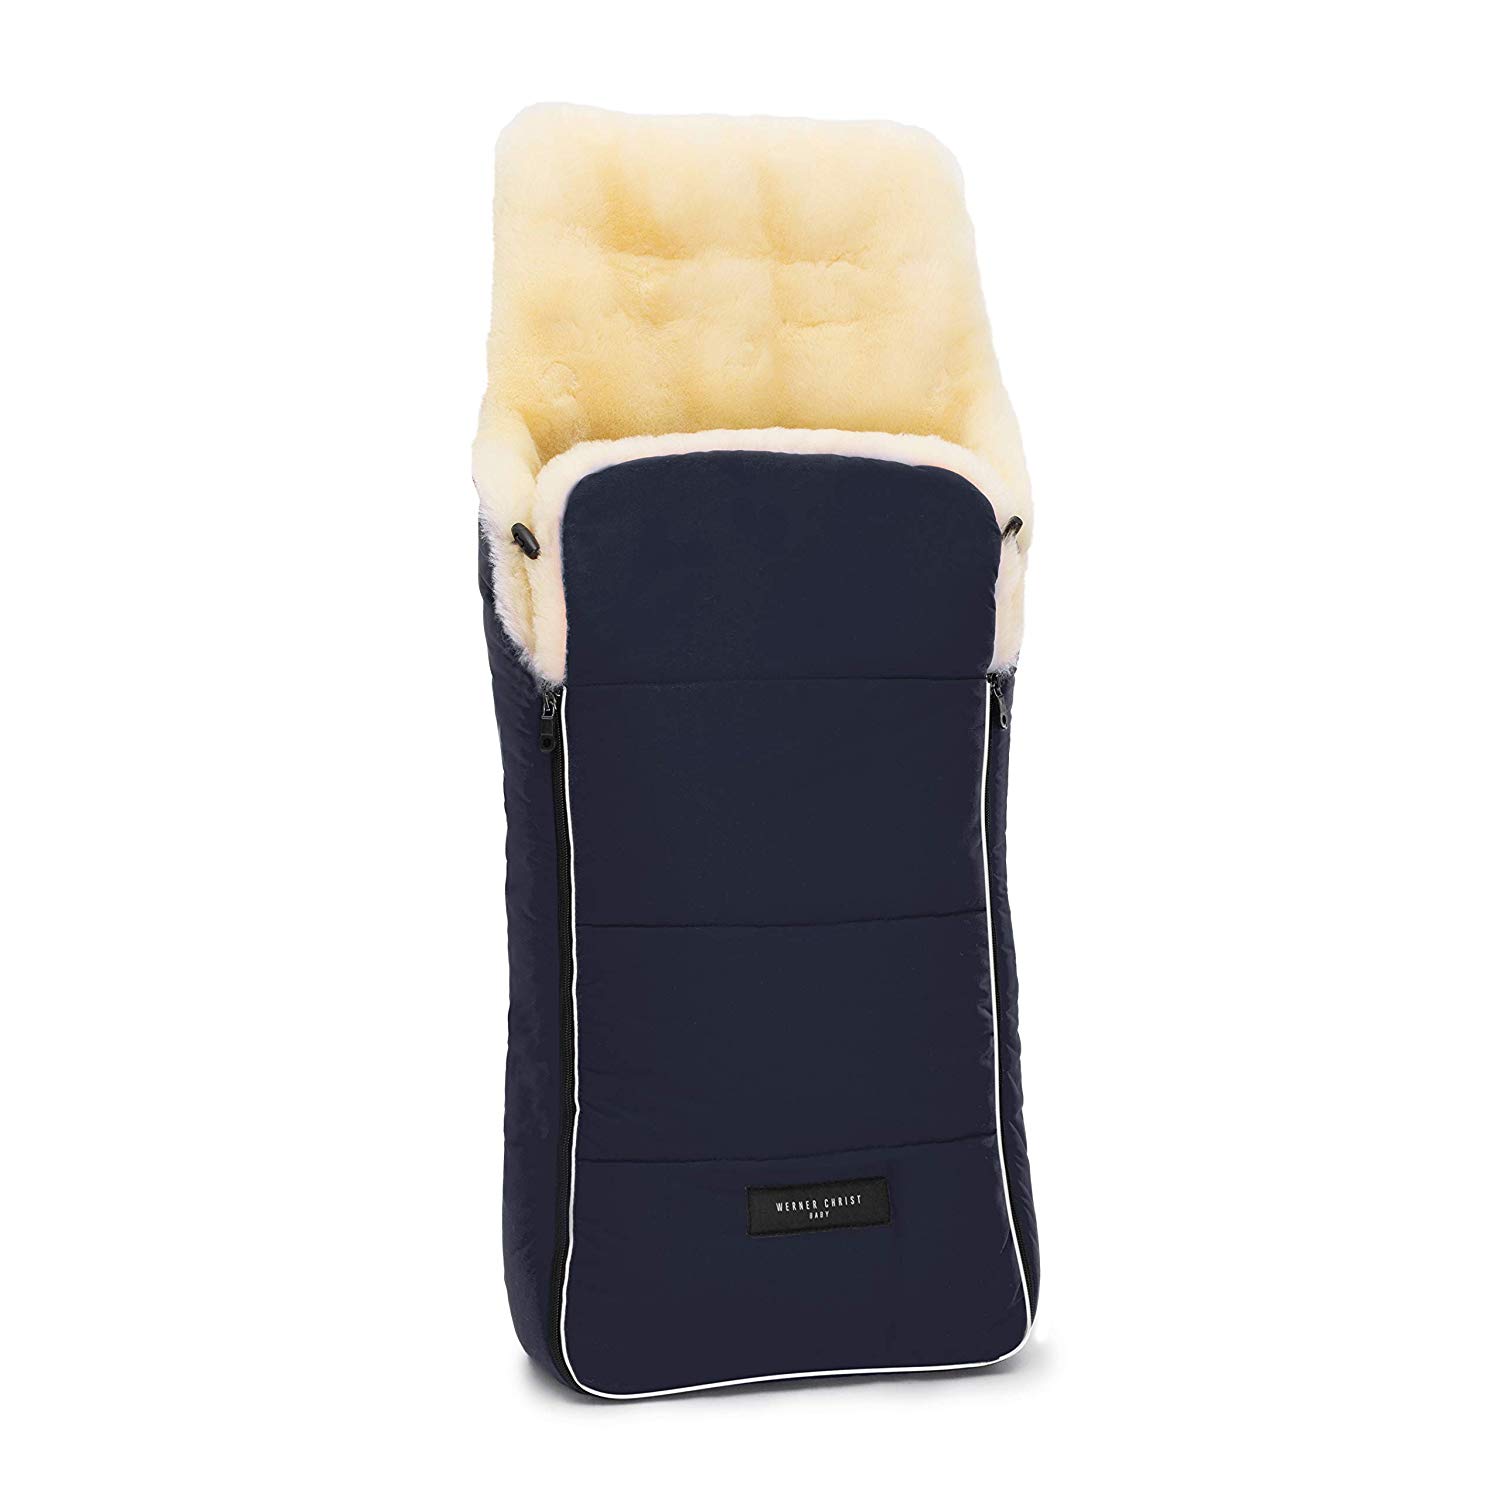 Sheepskin Footmuff Christ Cuddly Sheepskin Foot Muff, Medical, Can be Used As A Changing Mat and Liner, One Size, Beige, Grey, Blue, Light Blue, Black, Red, Brown blue